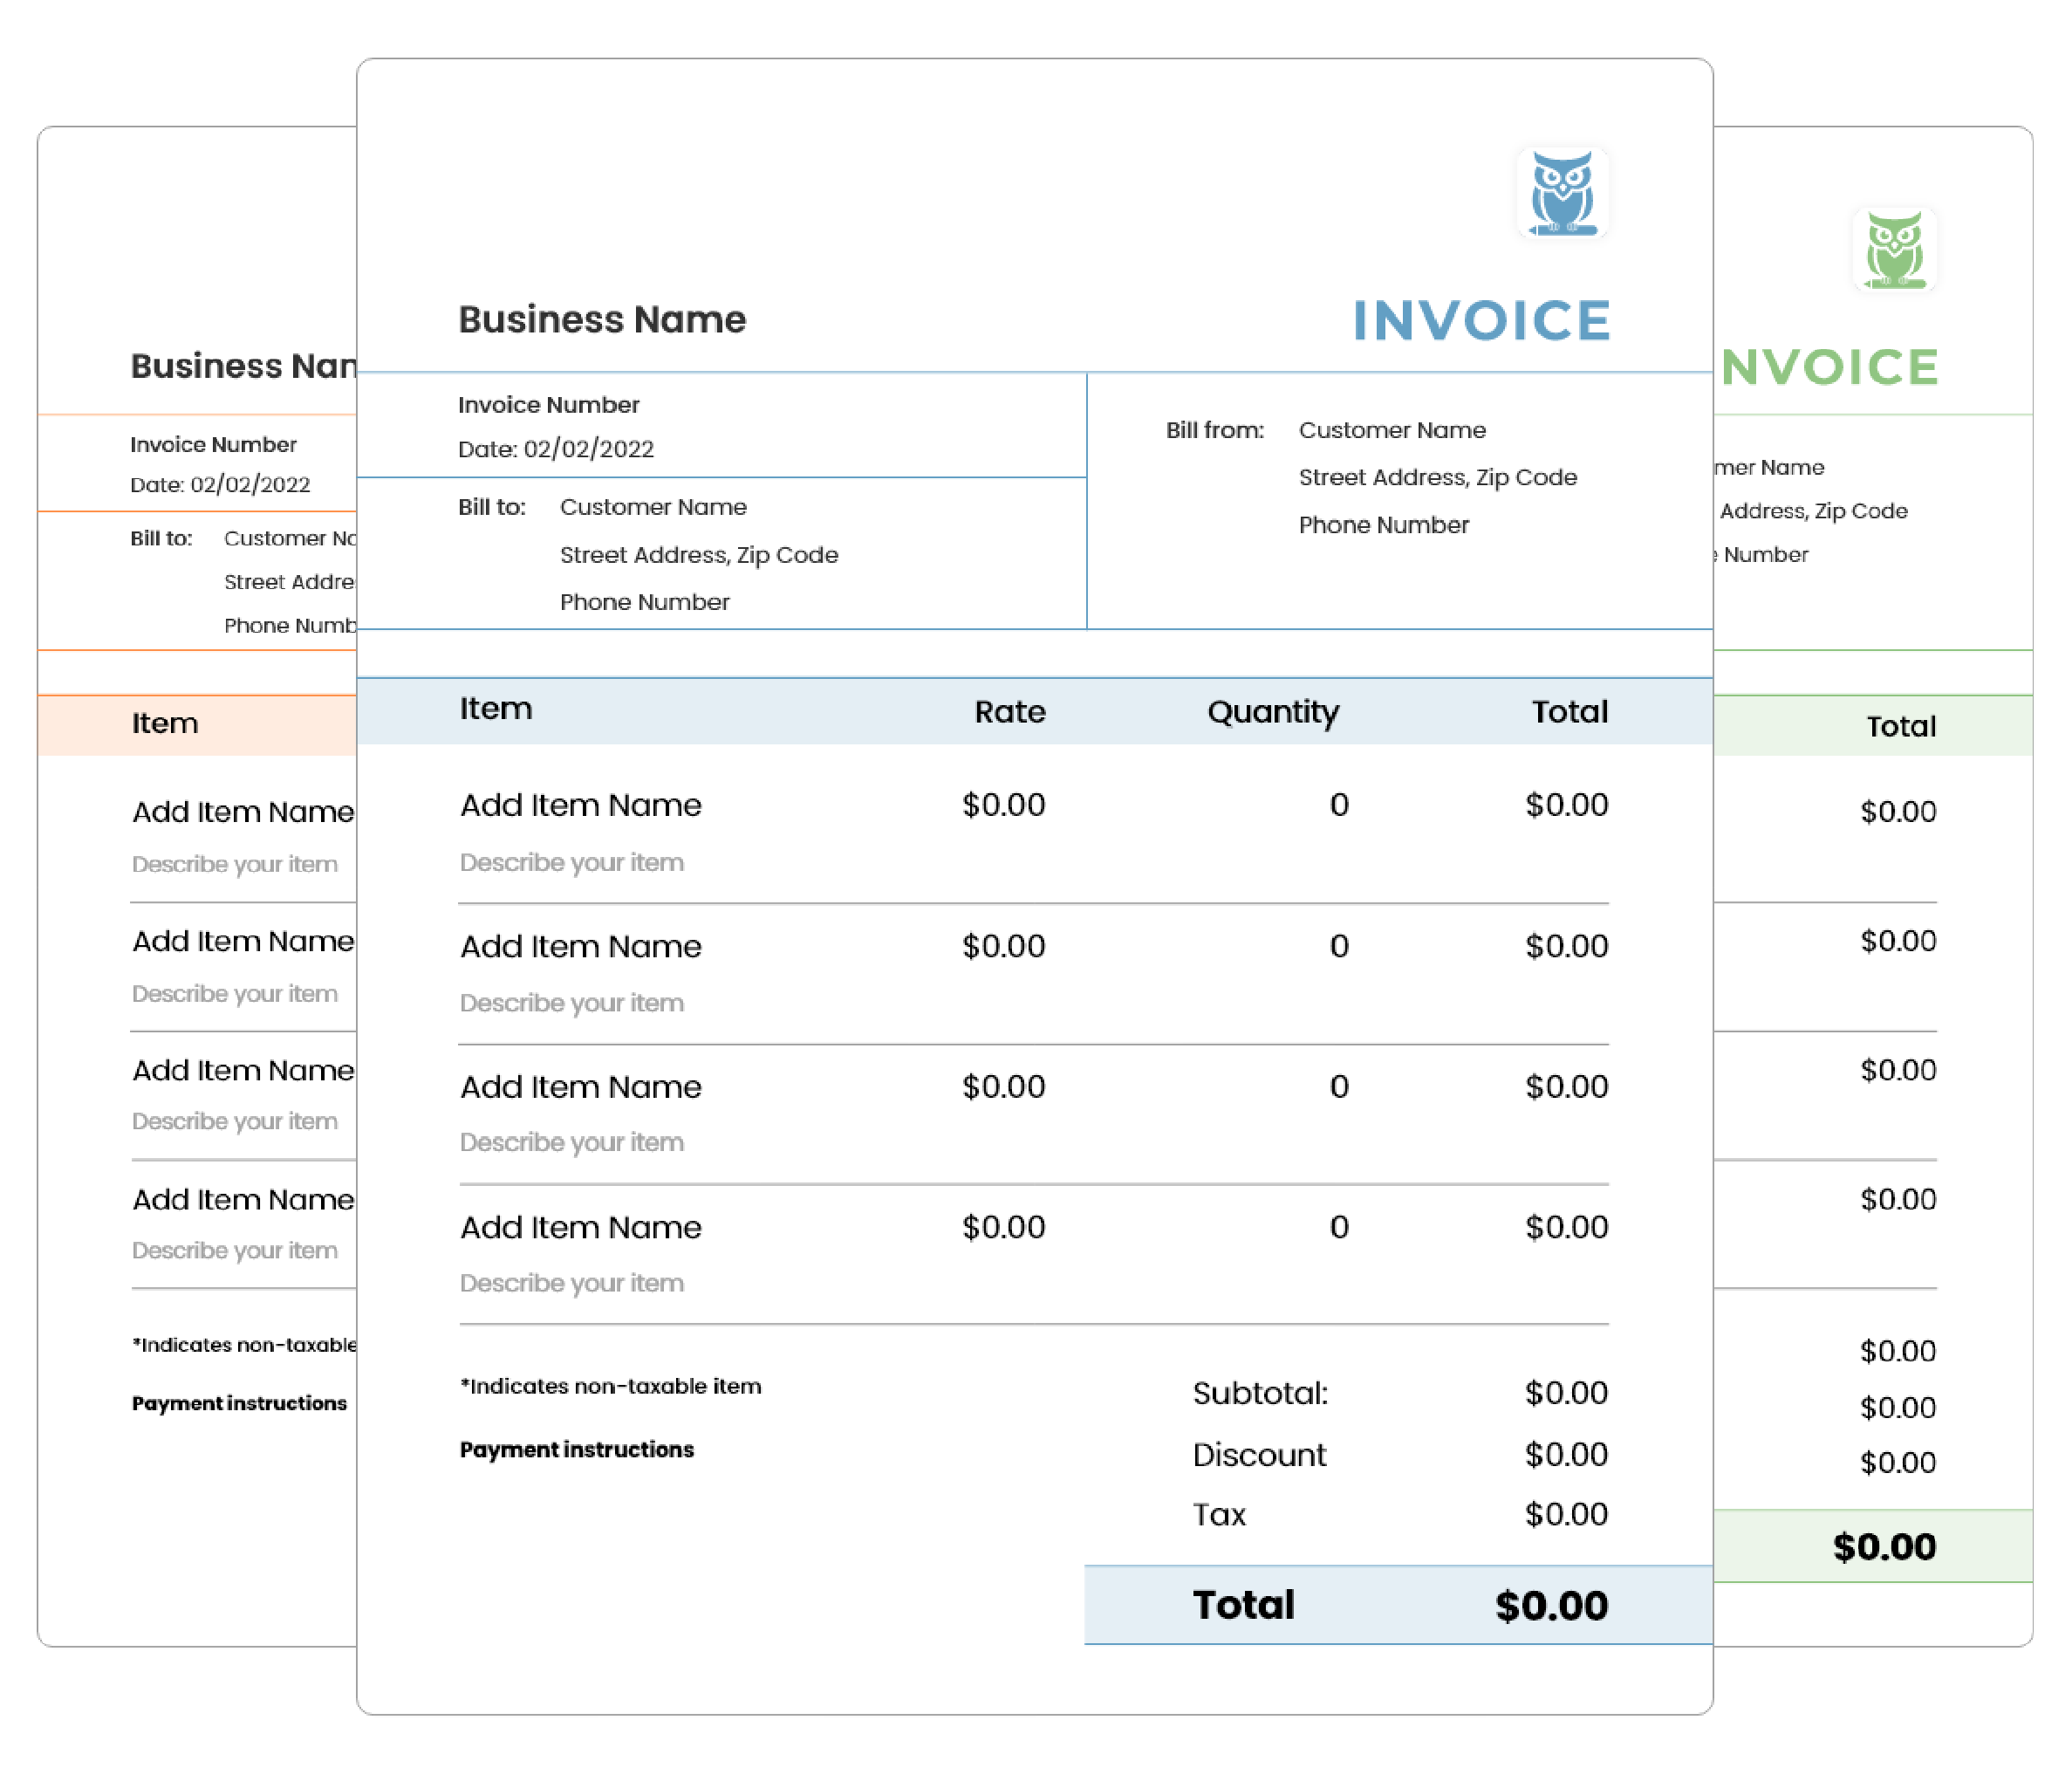 Tips to create a professional invoice